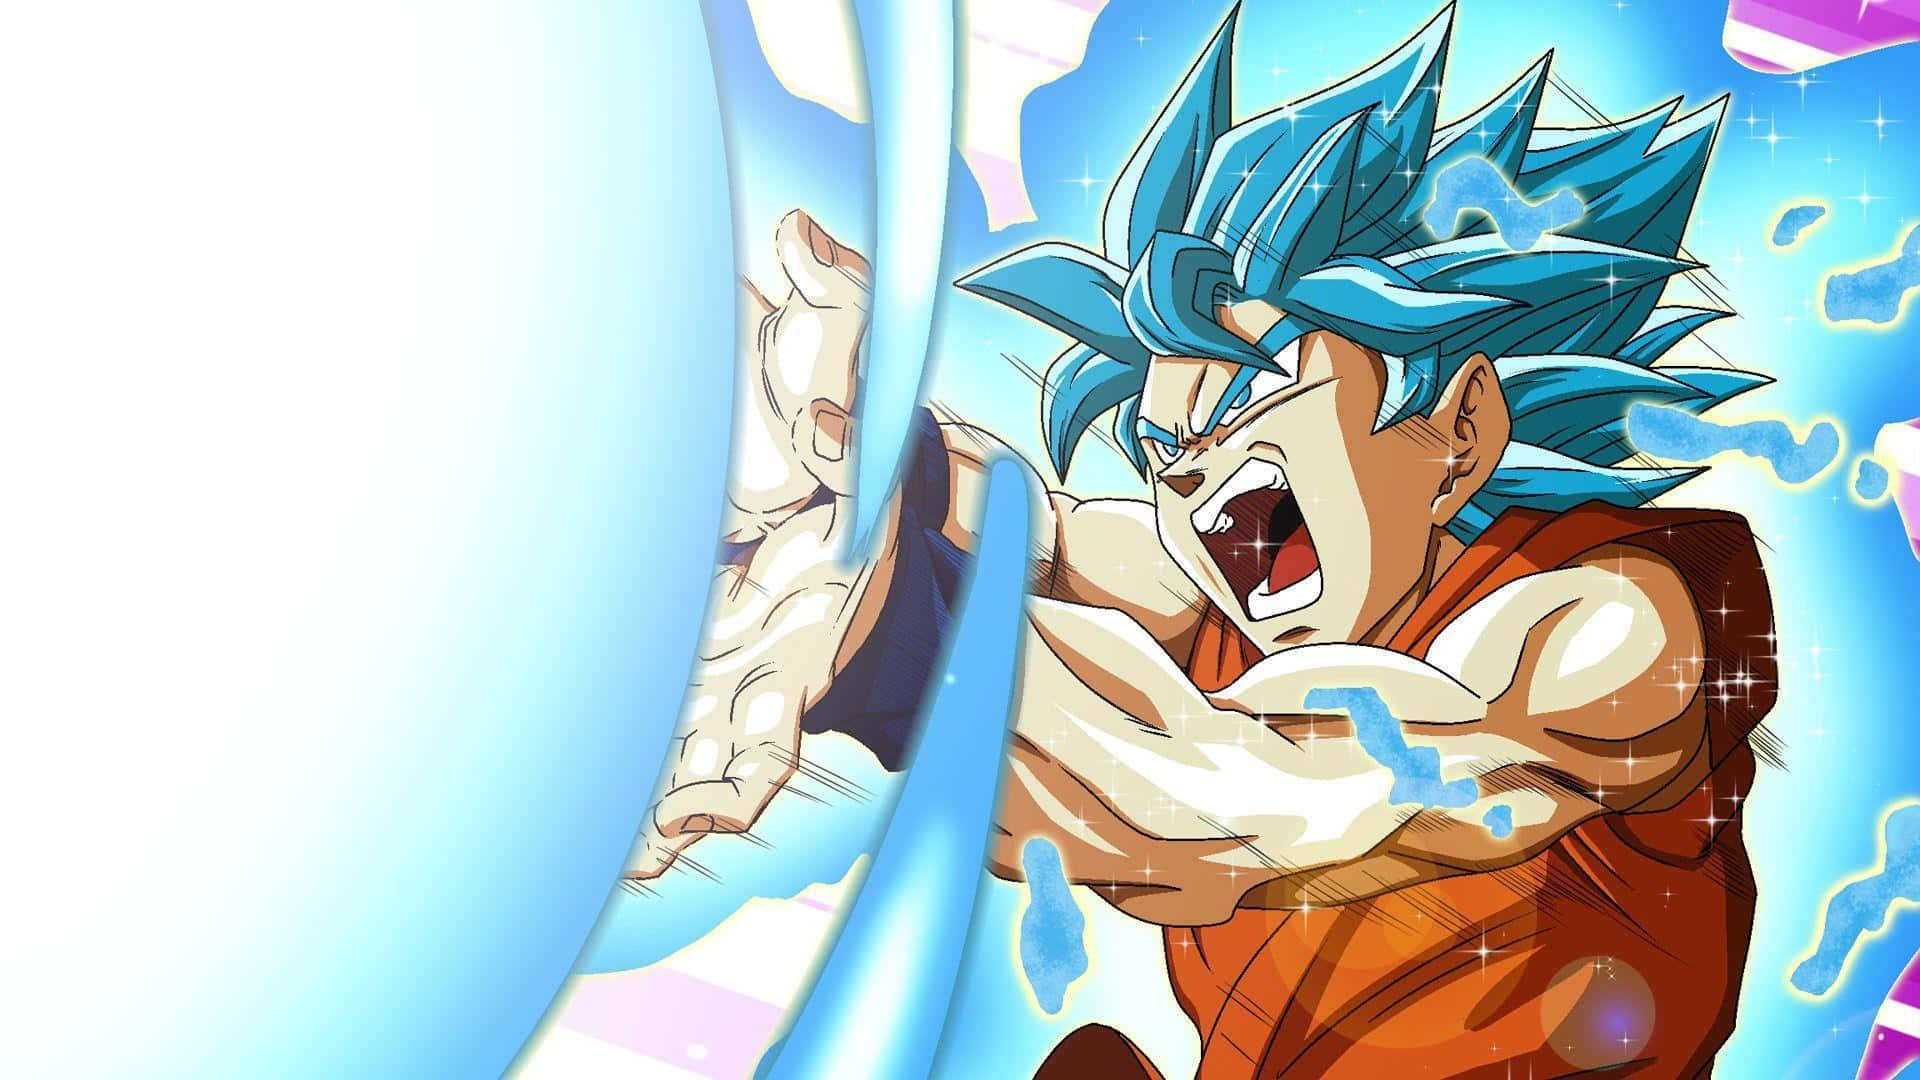 The powerful and unstoppable Super Saiyan Blue! Wallpaper